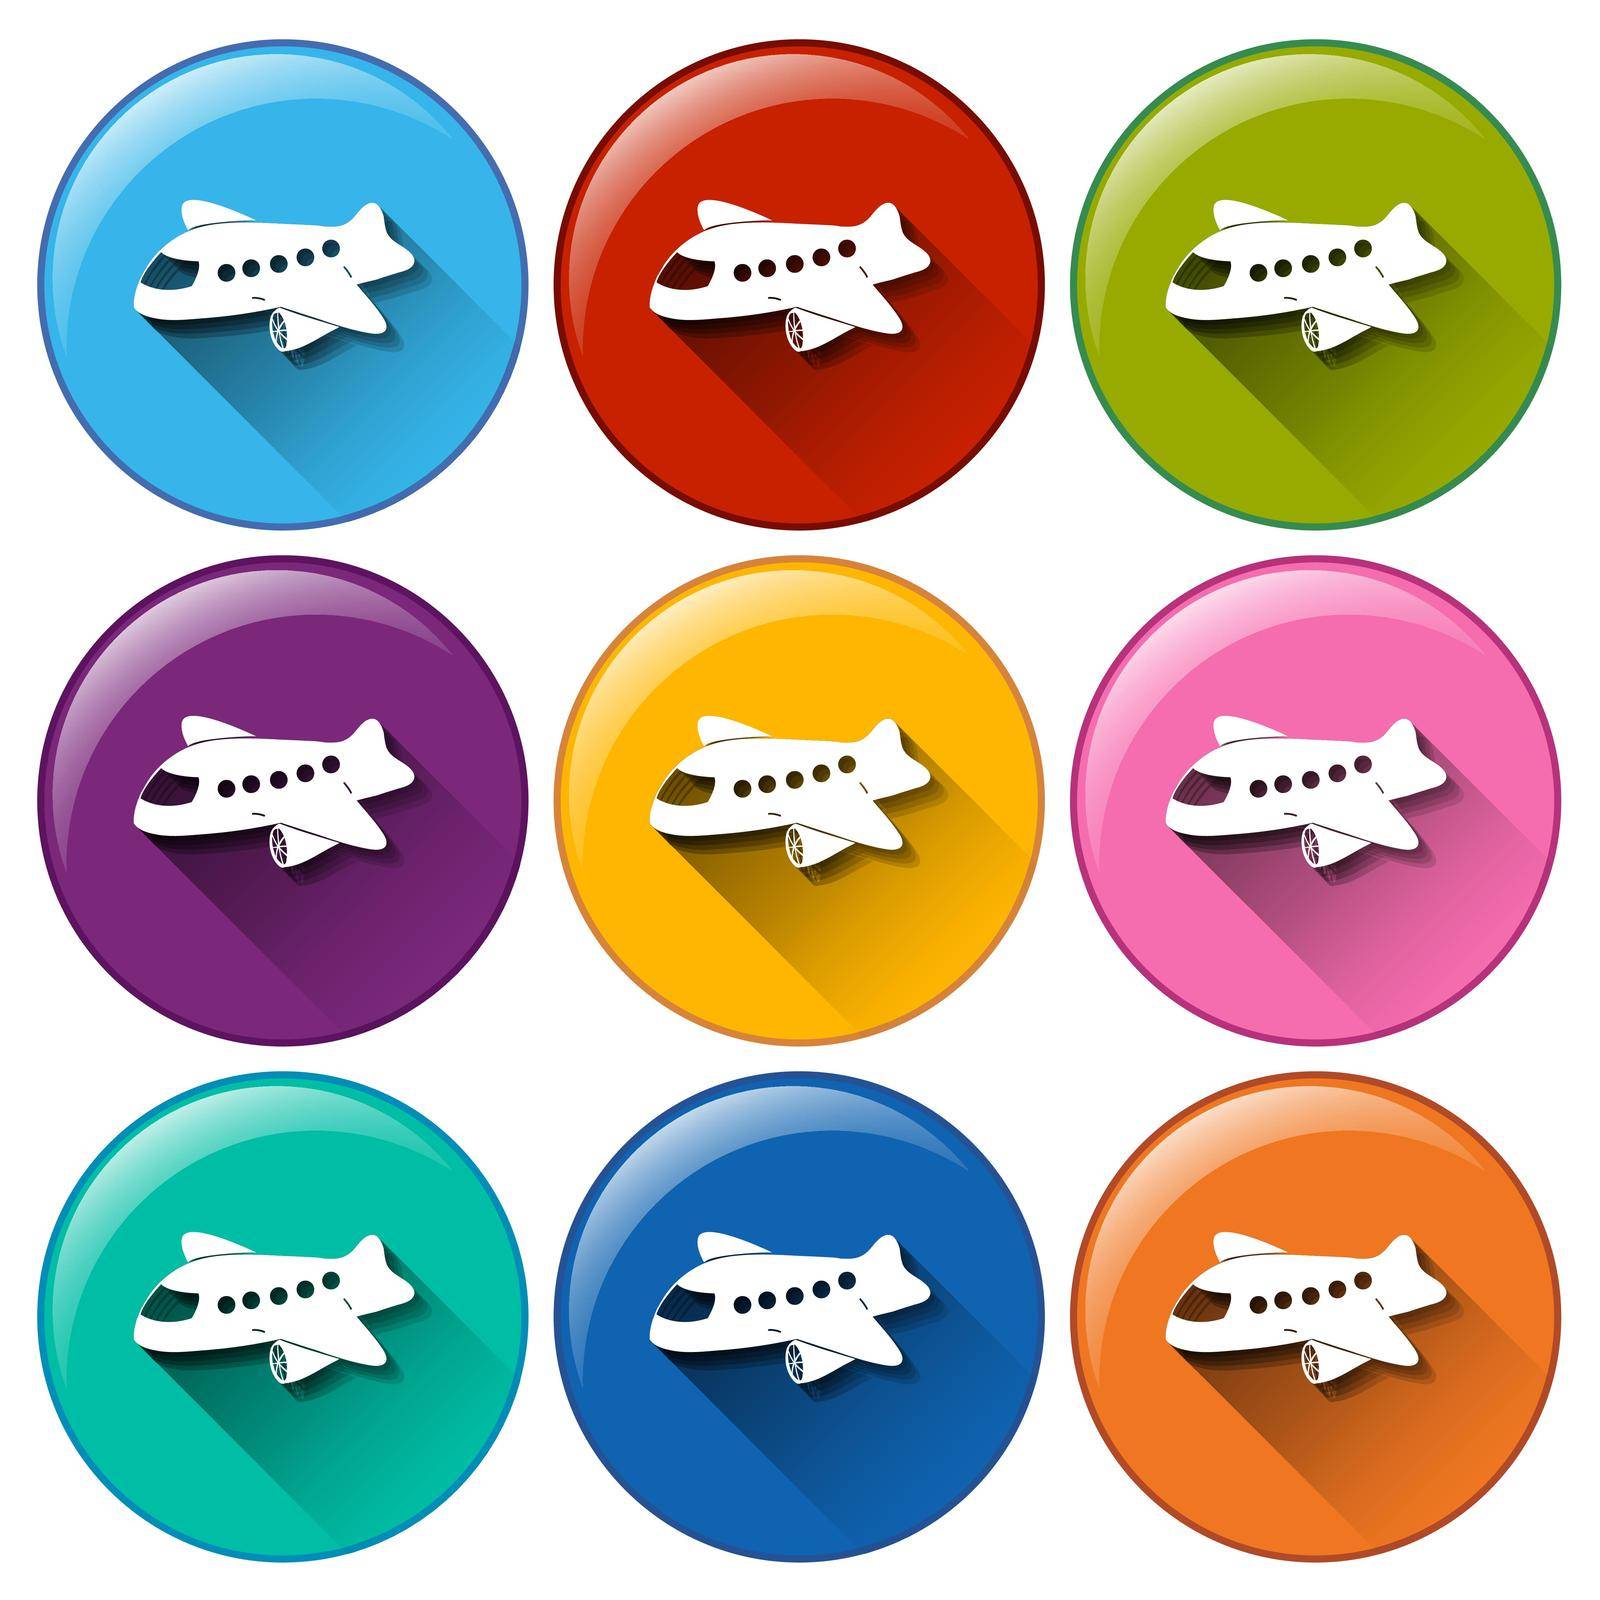 Airplane icons by iimages